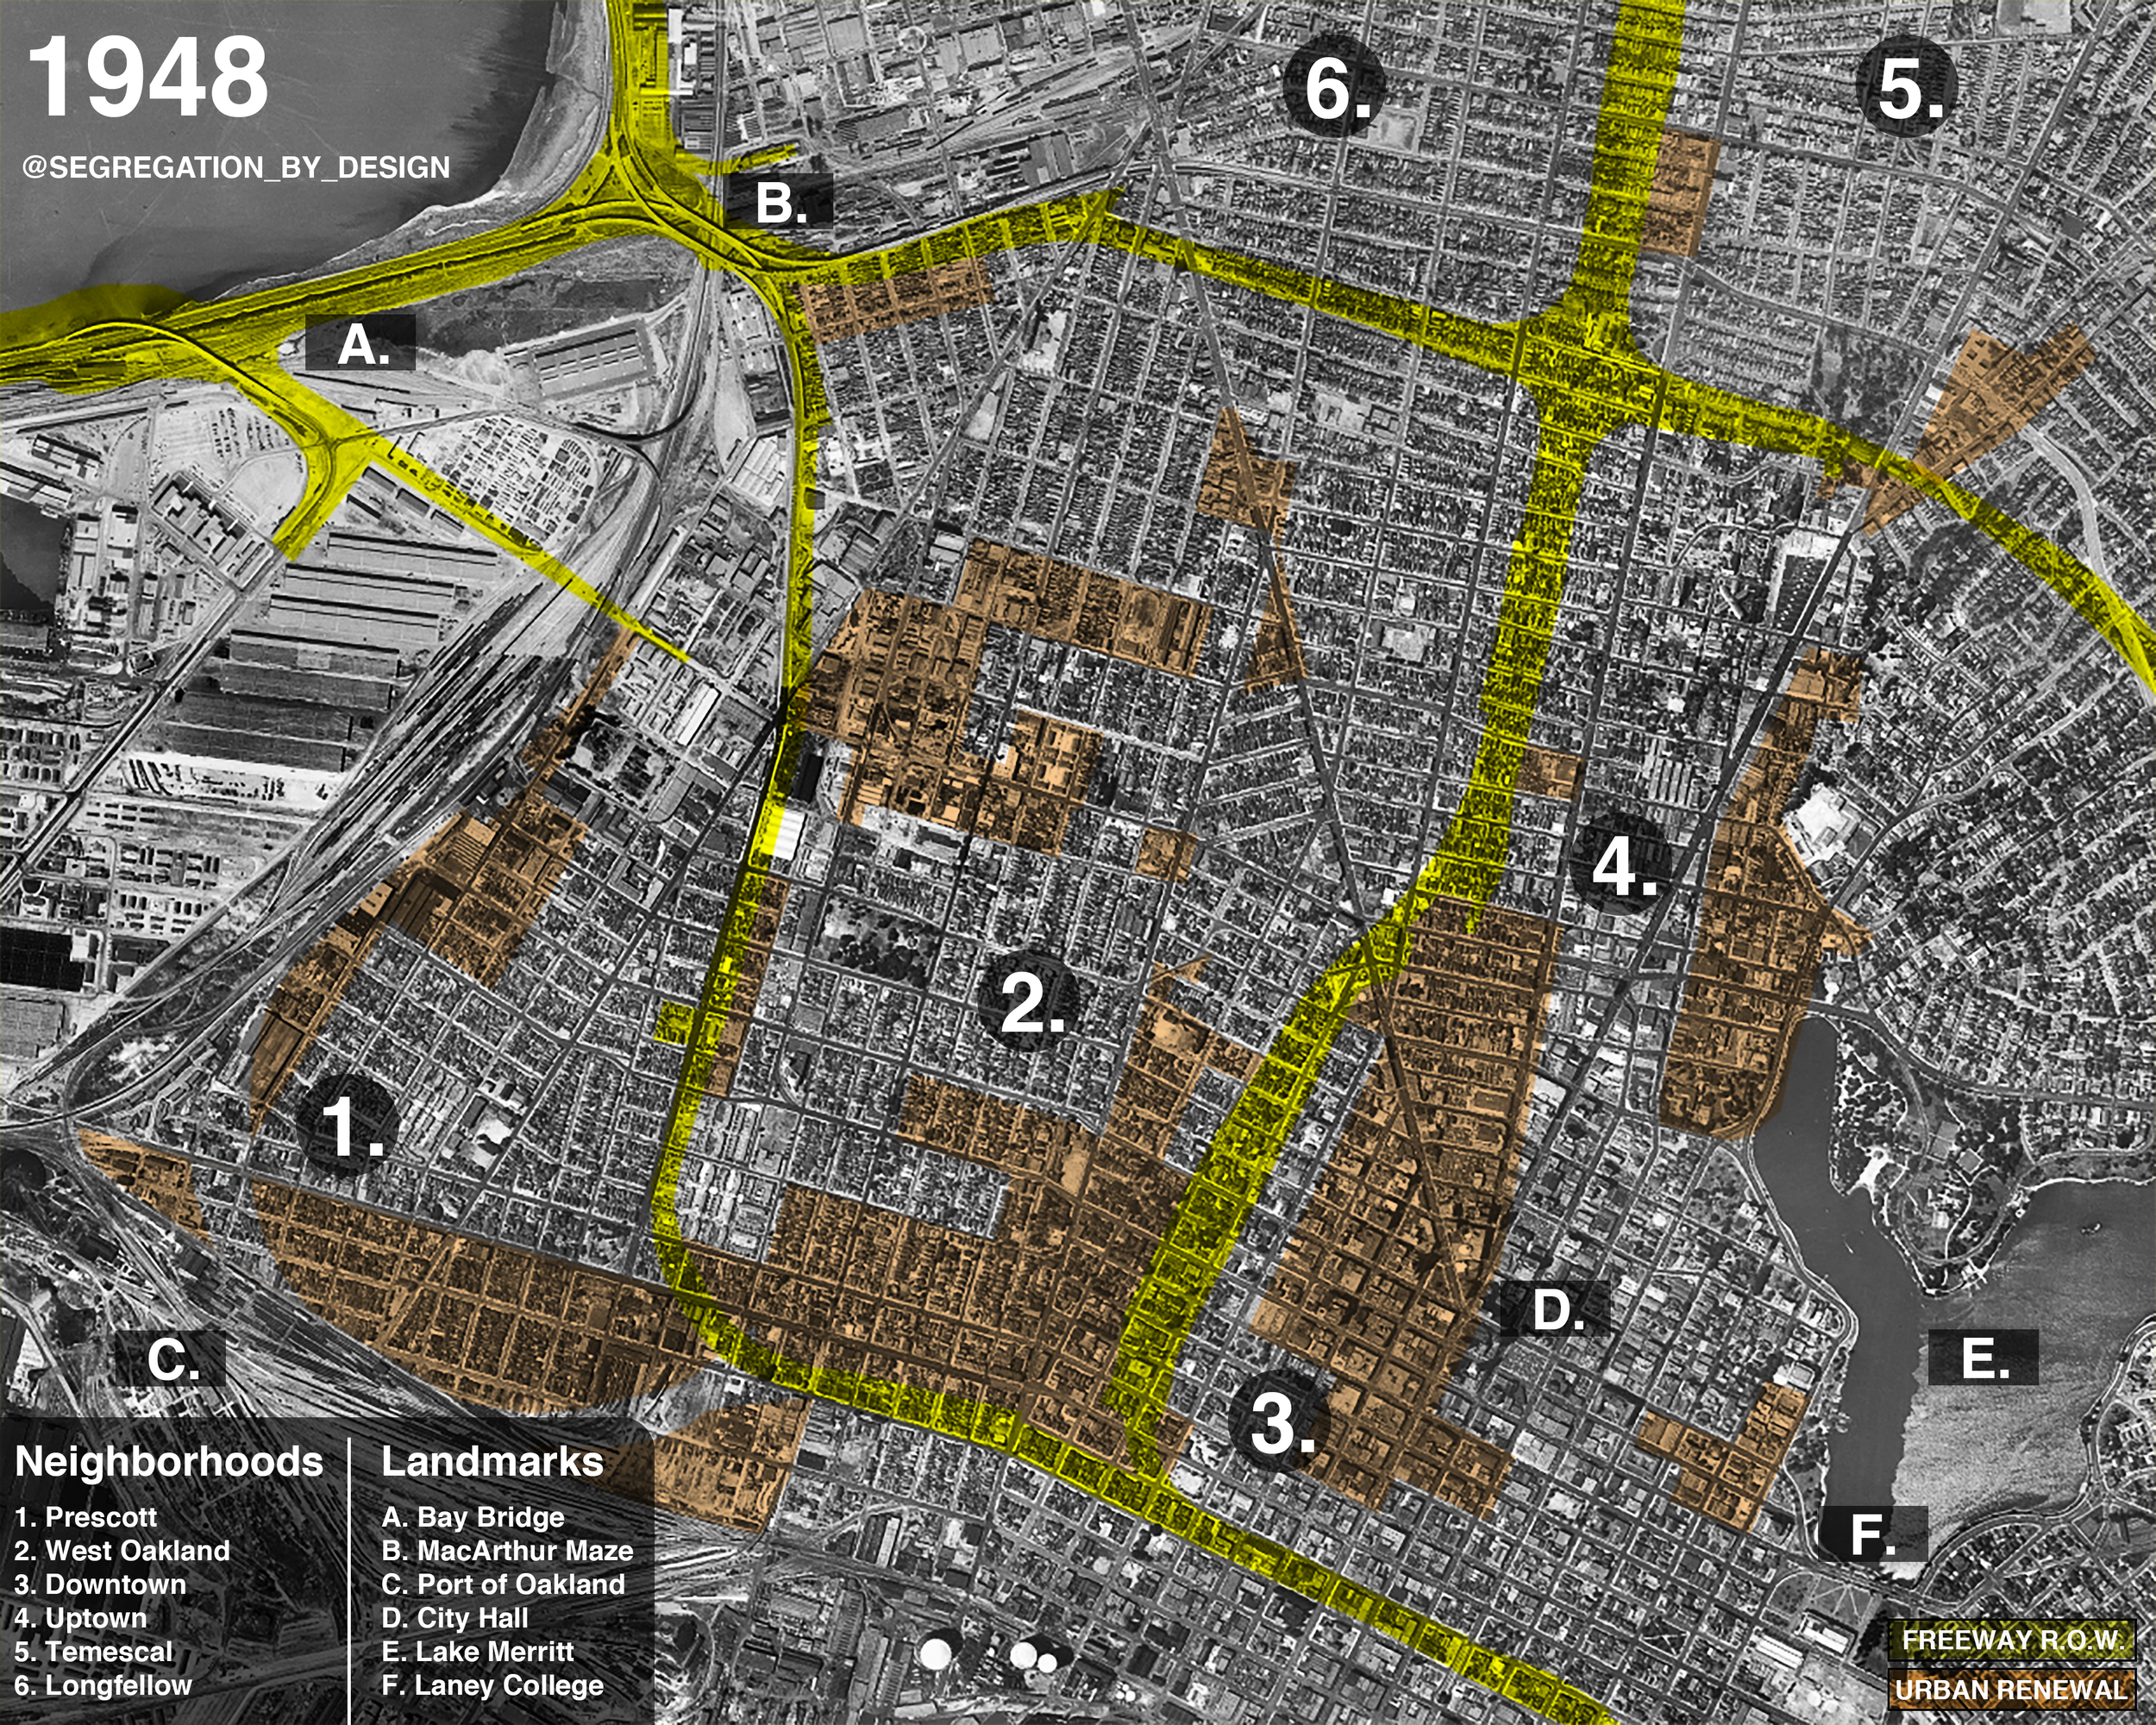 Map showing West Oakland cut off from the main city by encircling freeway renewal projects